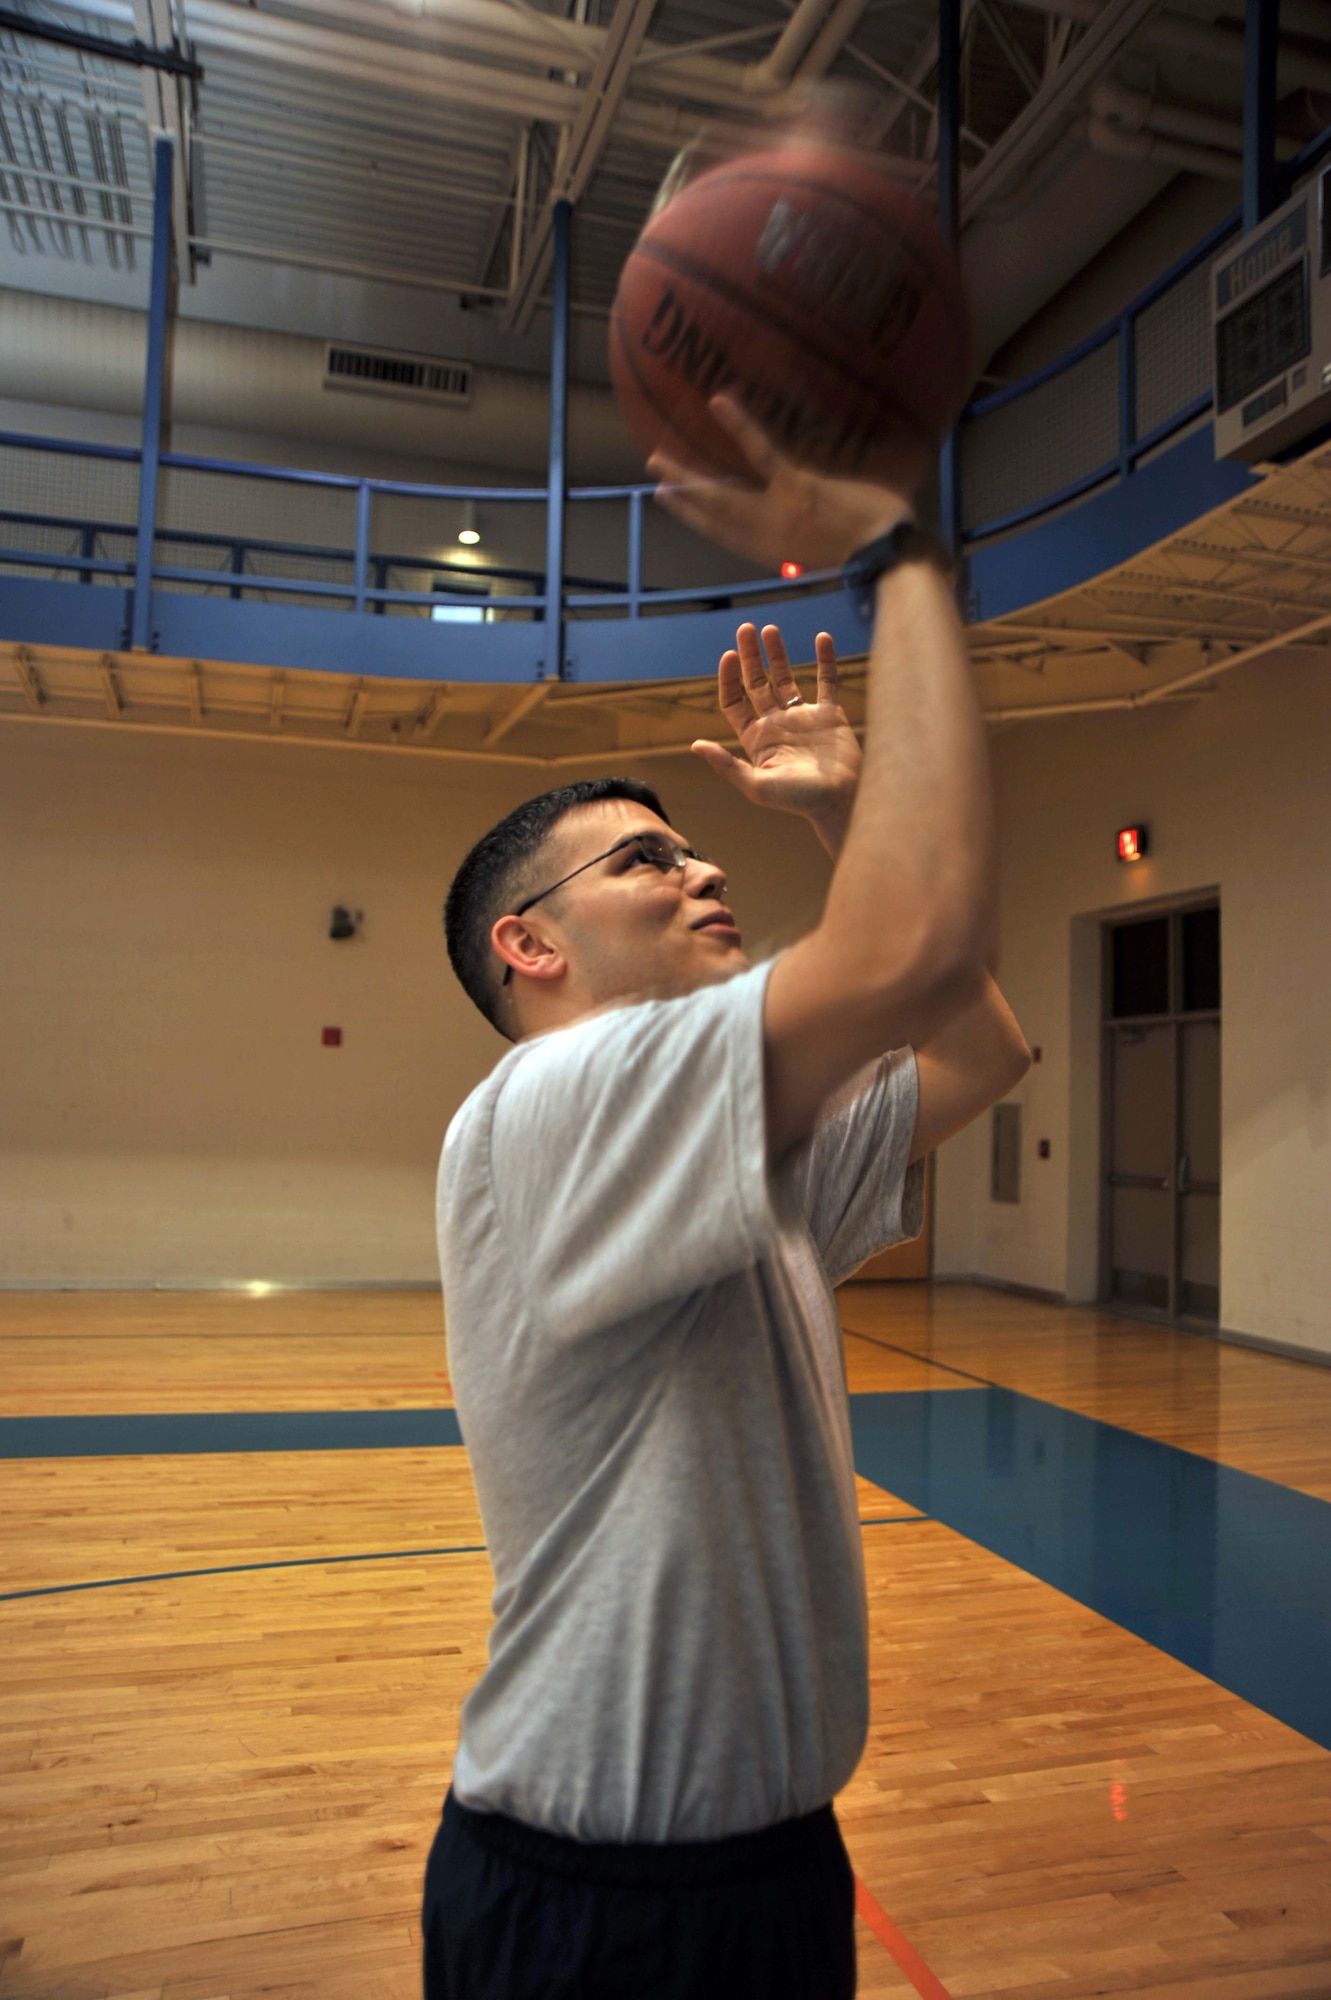 Senior Airman Tres Taylor shoots hoops as part of his daily workout at the base fitness center, McConnell Air Force Base, Kan.  Airman Taylor recently improved his physical fitness test score by more than 60 points.  (U.S. Air Force photo/Senior Airman Abigail Klein)